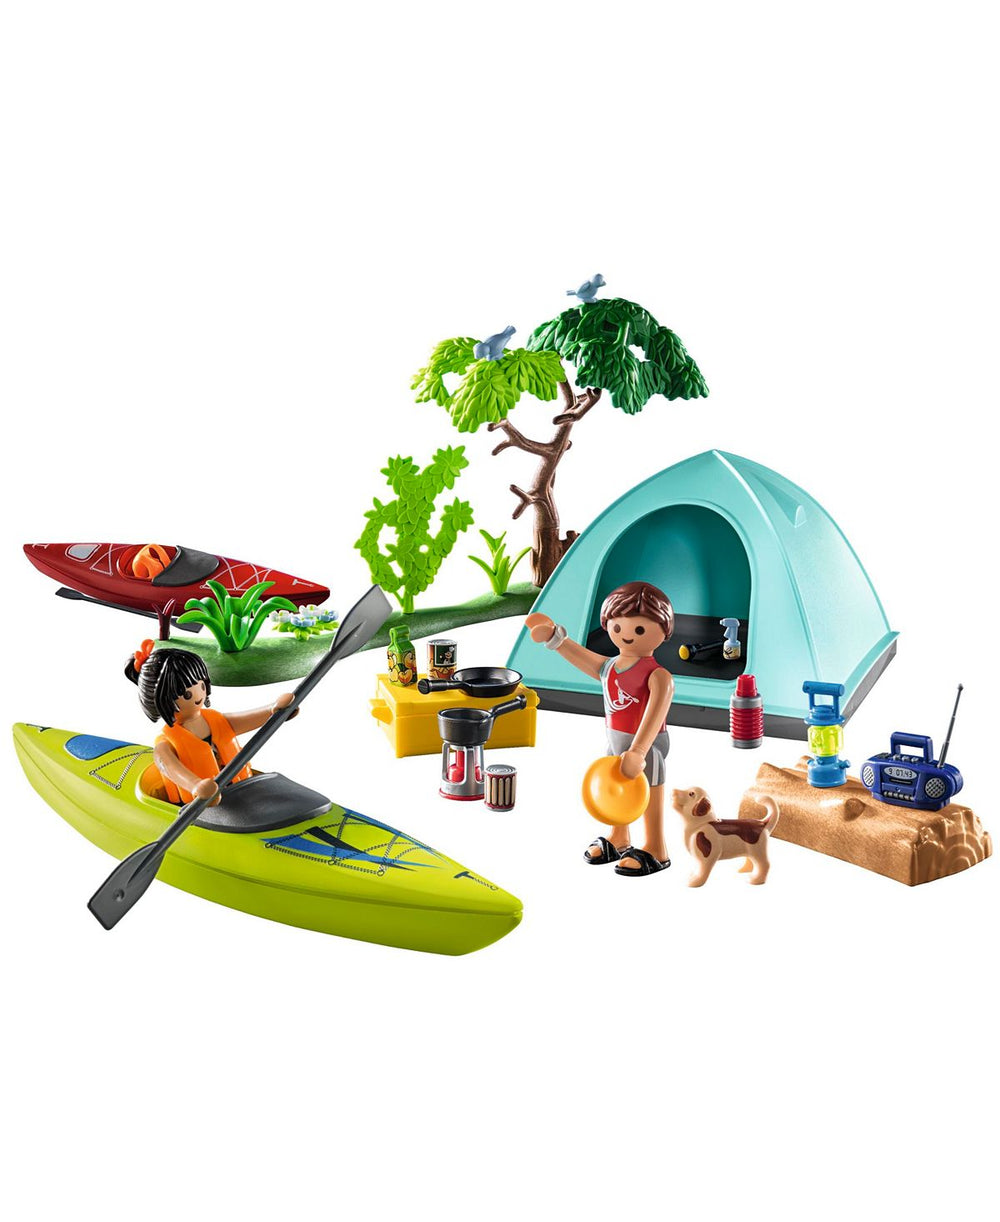 PLAYMOBIL Family Camping Trip Playset with Kayaks and Tent